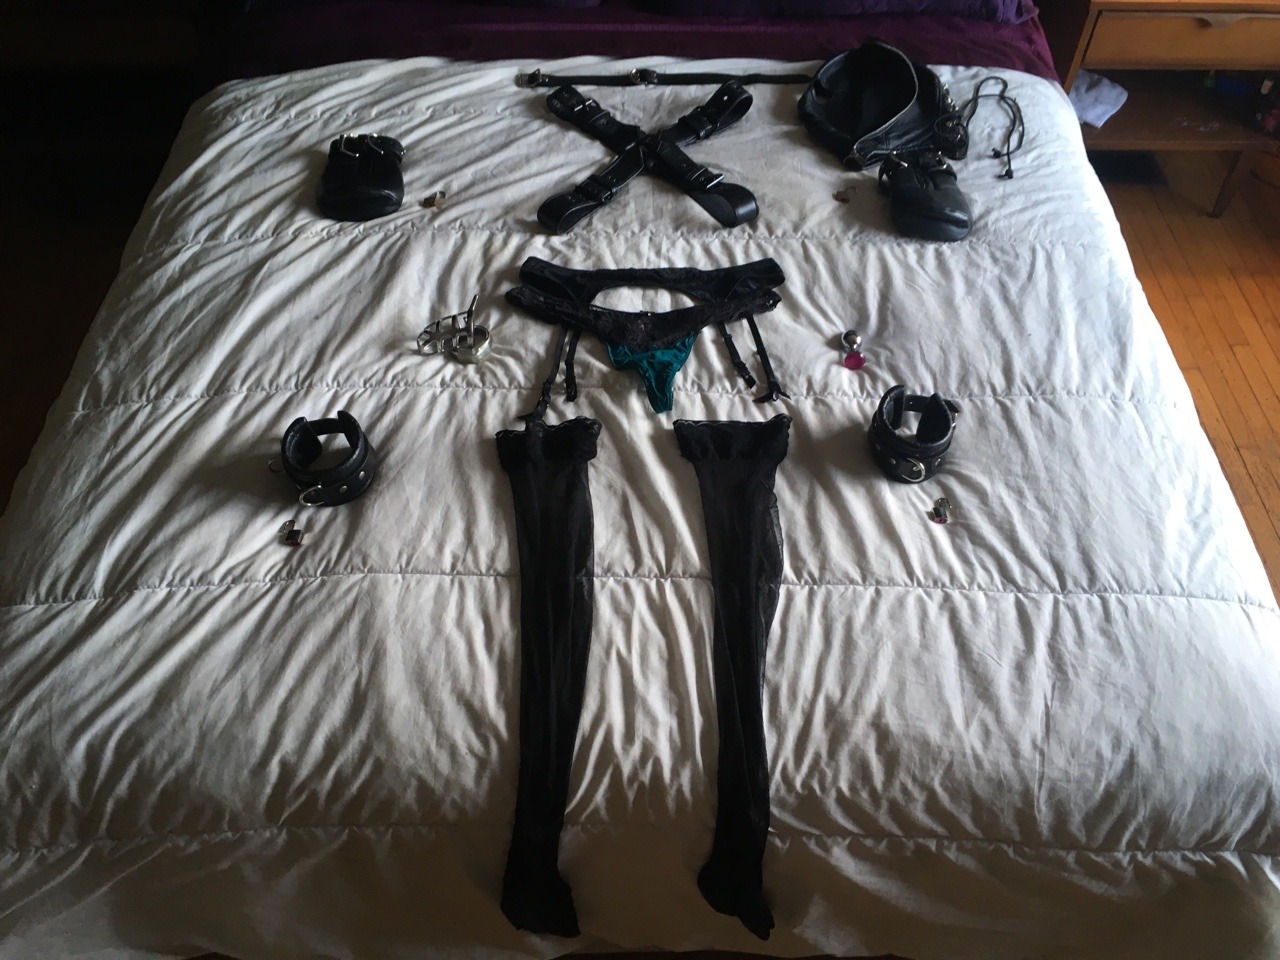 bondage gear spread on the bed